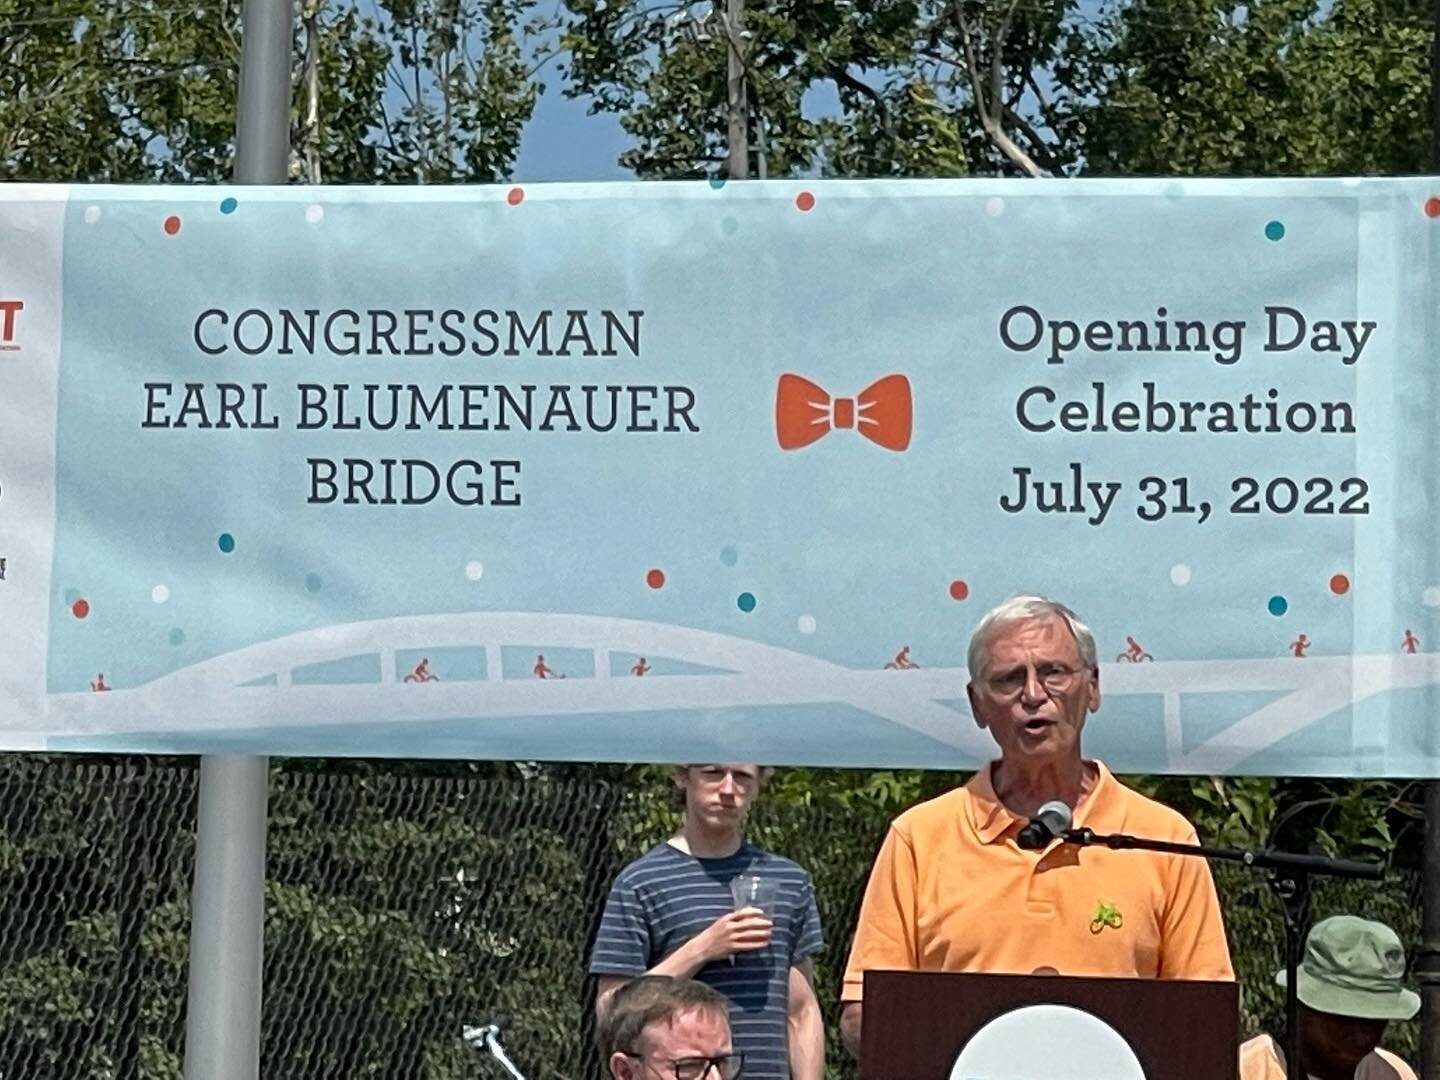 The &ldquo;City of Bridges&rdquo; gets a new bicycle and pedestrian bridge named for visionary Congressman Earl Blumenauer. This innovative structure joins NE to SE Portland. Photos include State Senator Lew Frederick with Kimberly Branam and Congres